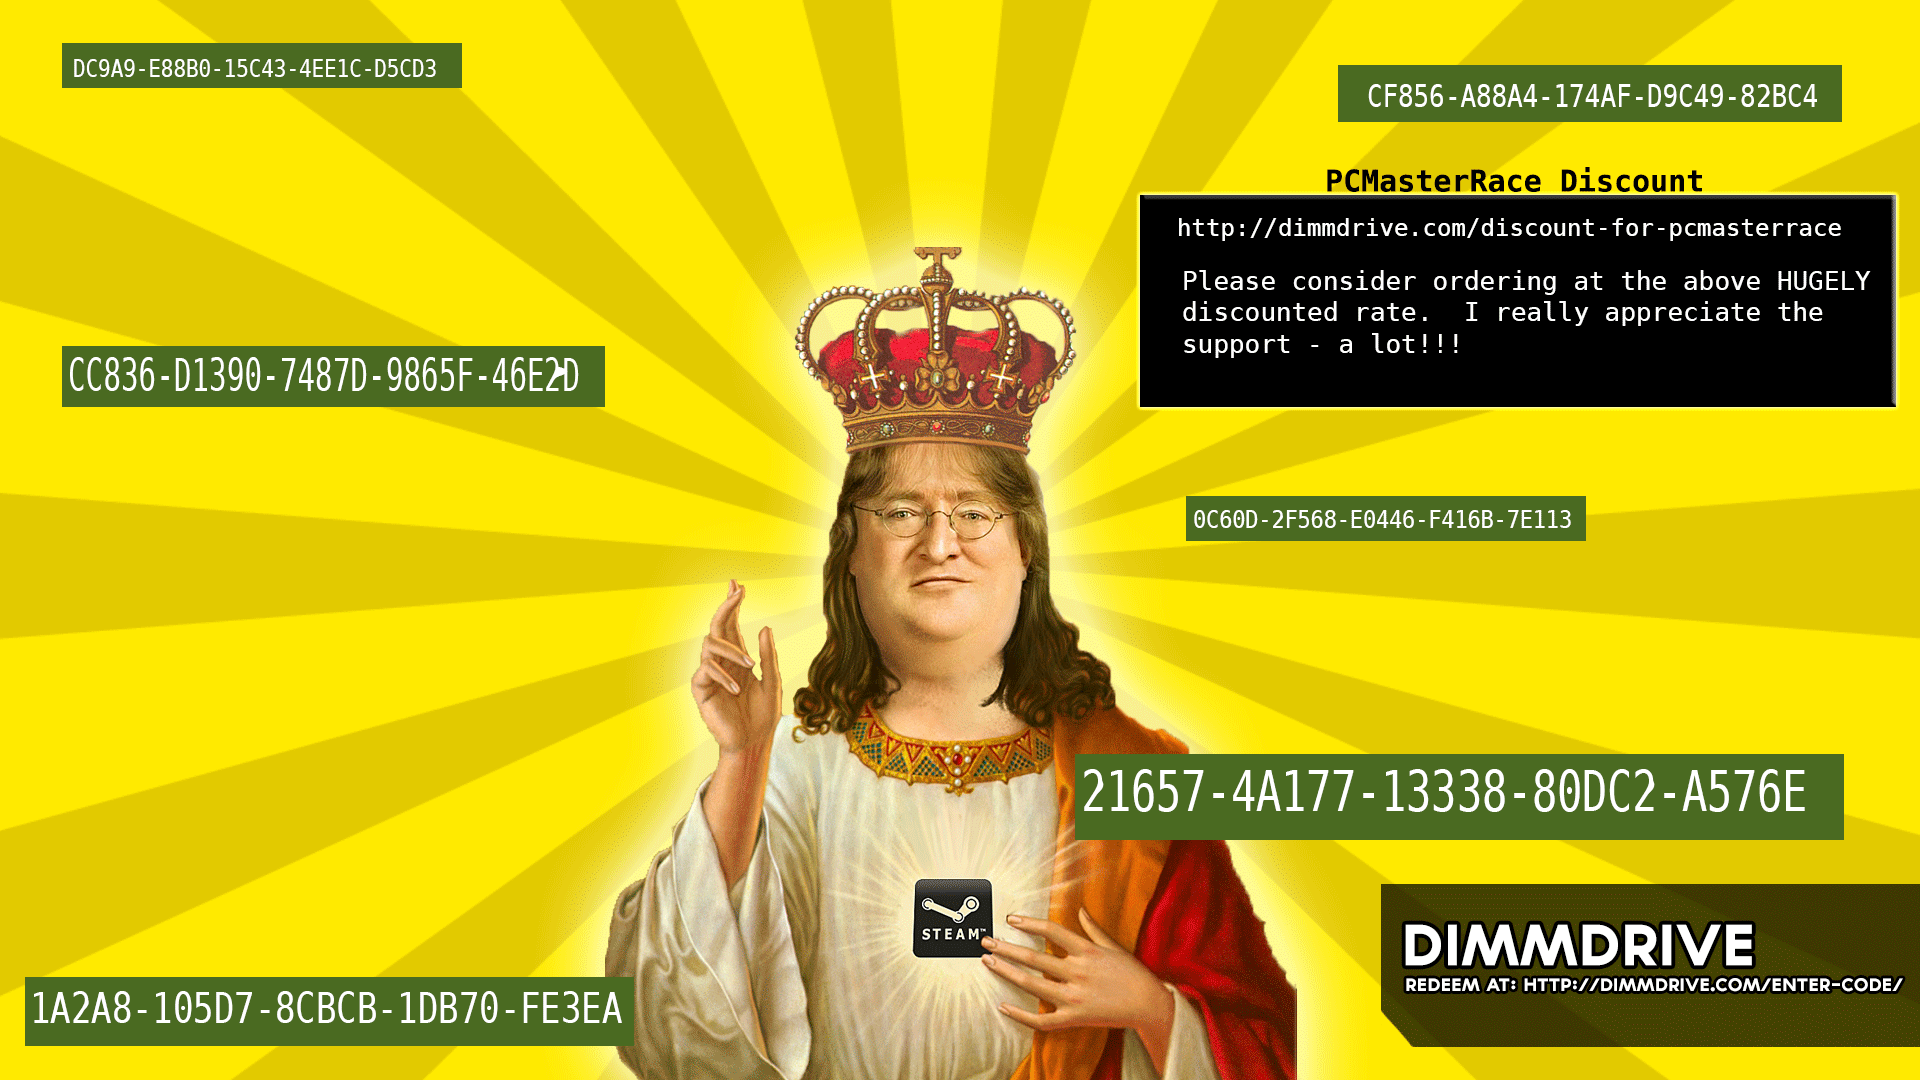 Lord Gaben Gif Pcmasterrace funzies   today is the day somebody gets